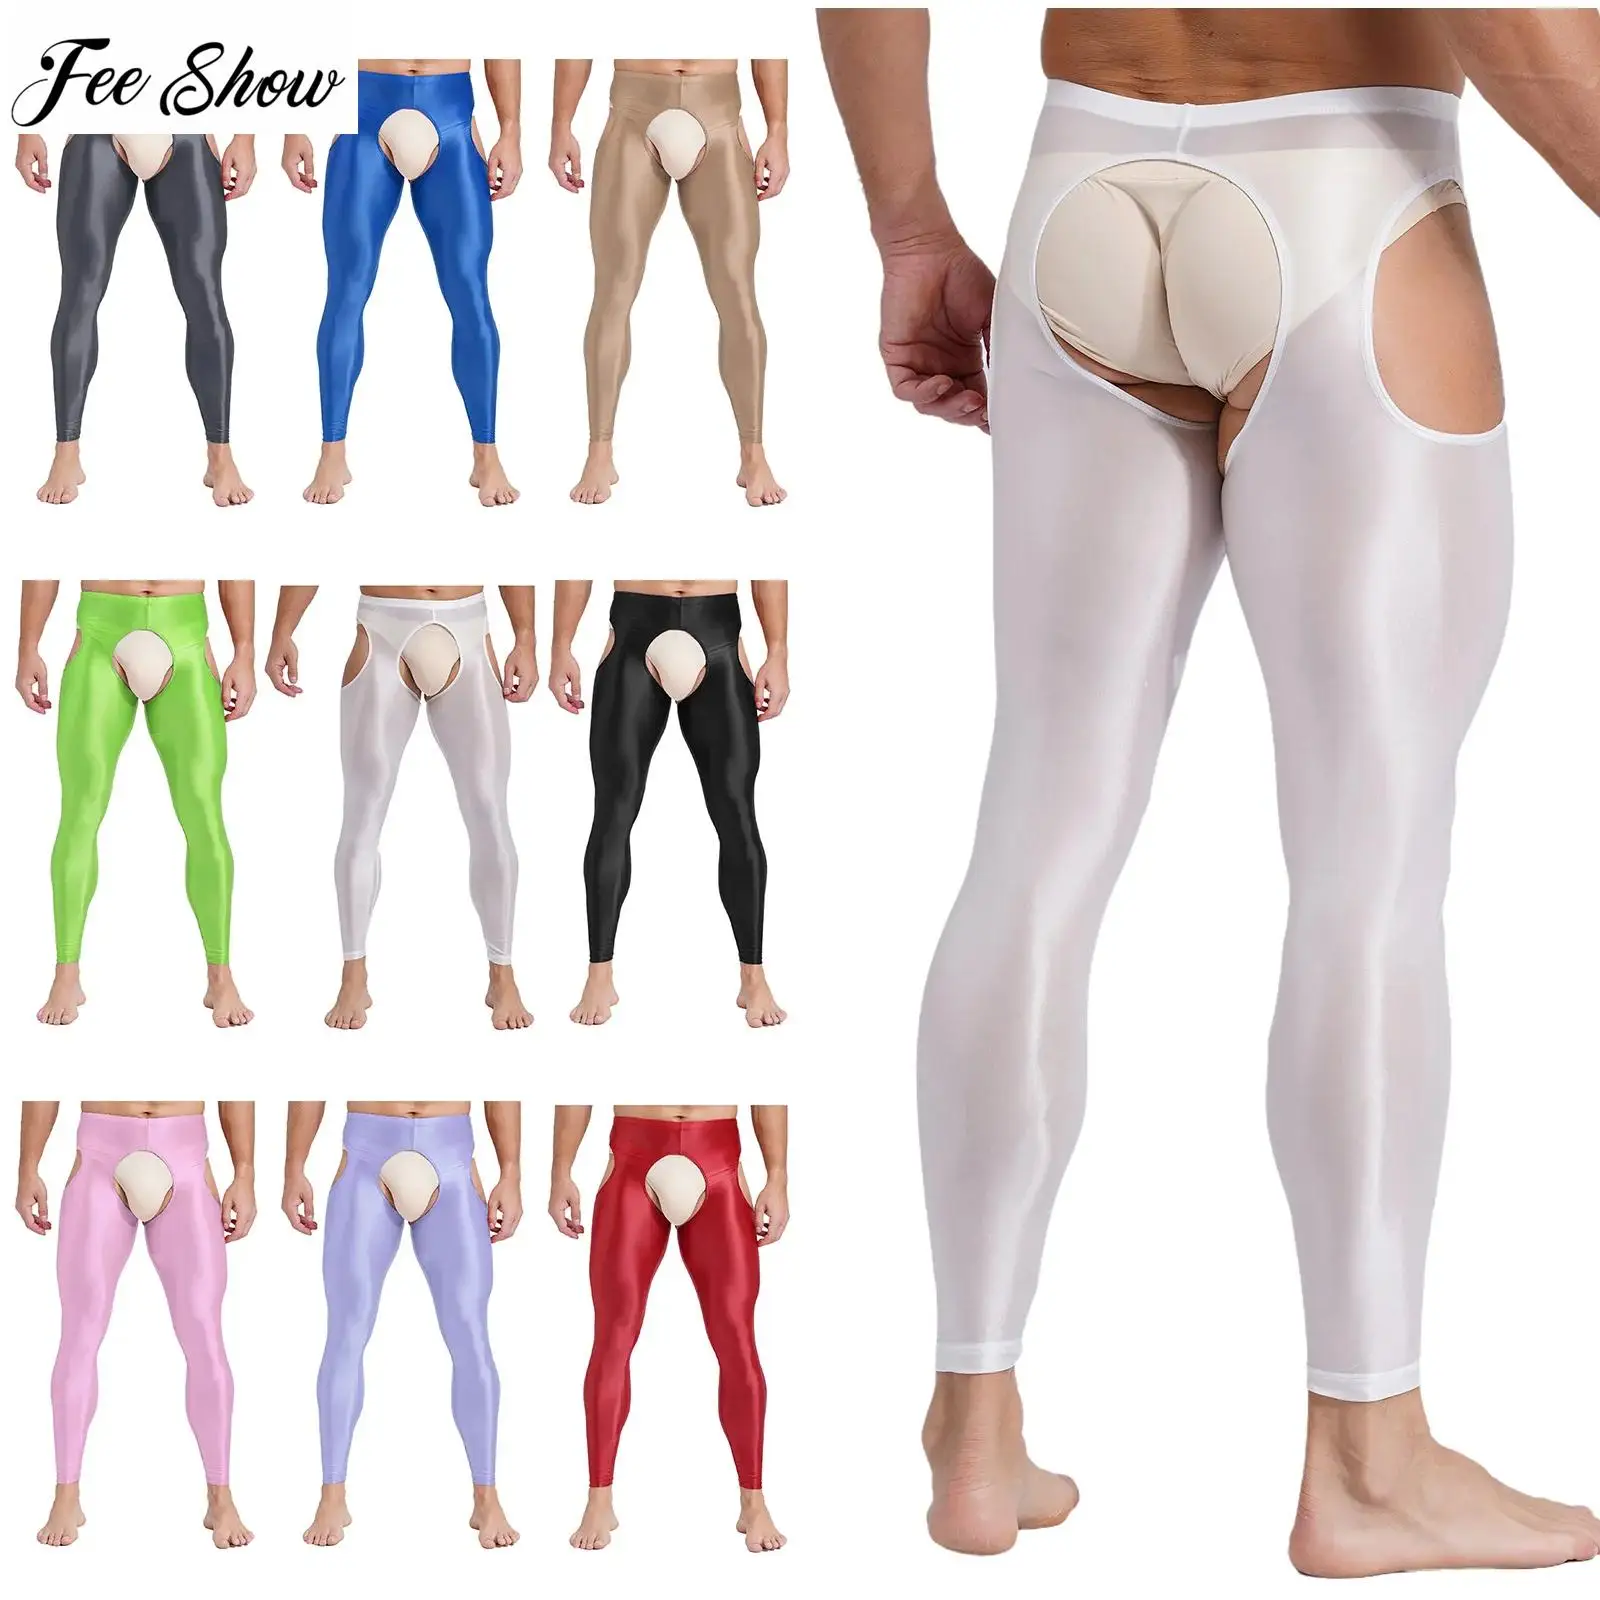 

Mens Glossy Cutout Leggings High Waist Open Crotch Thigh Hollow Out High Stretchy Pencil Pants Workout Skinny Pants